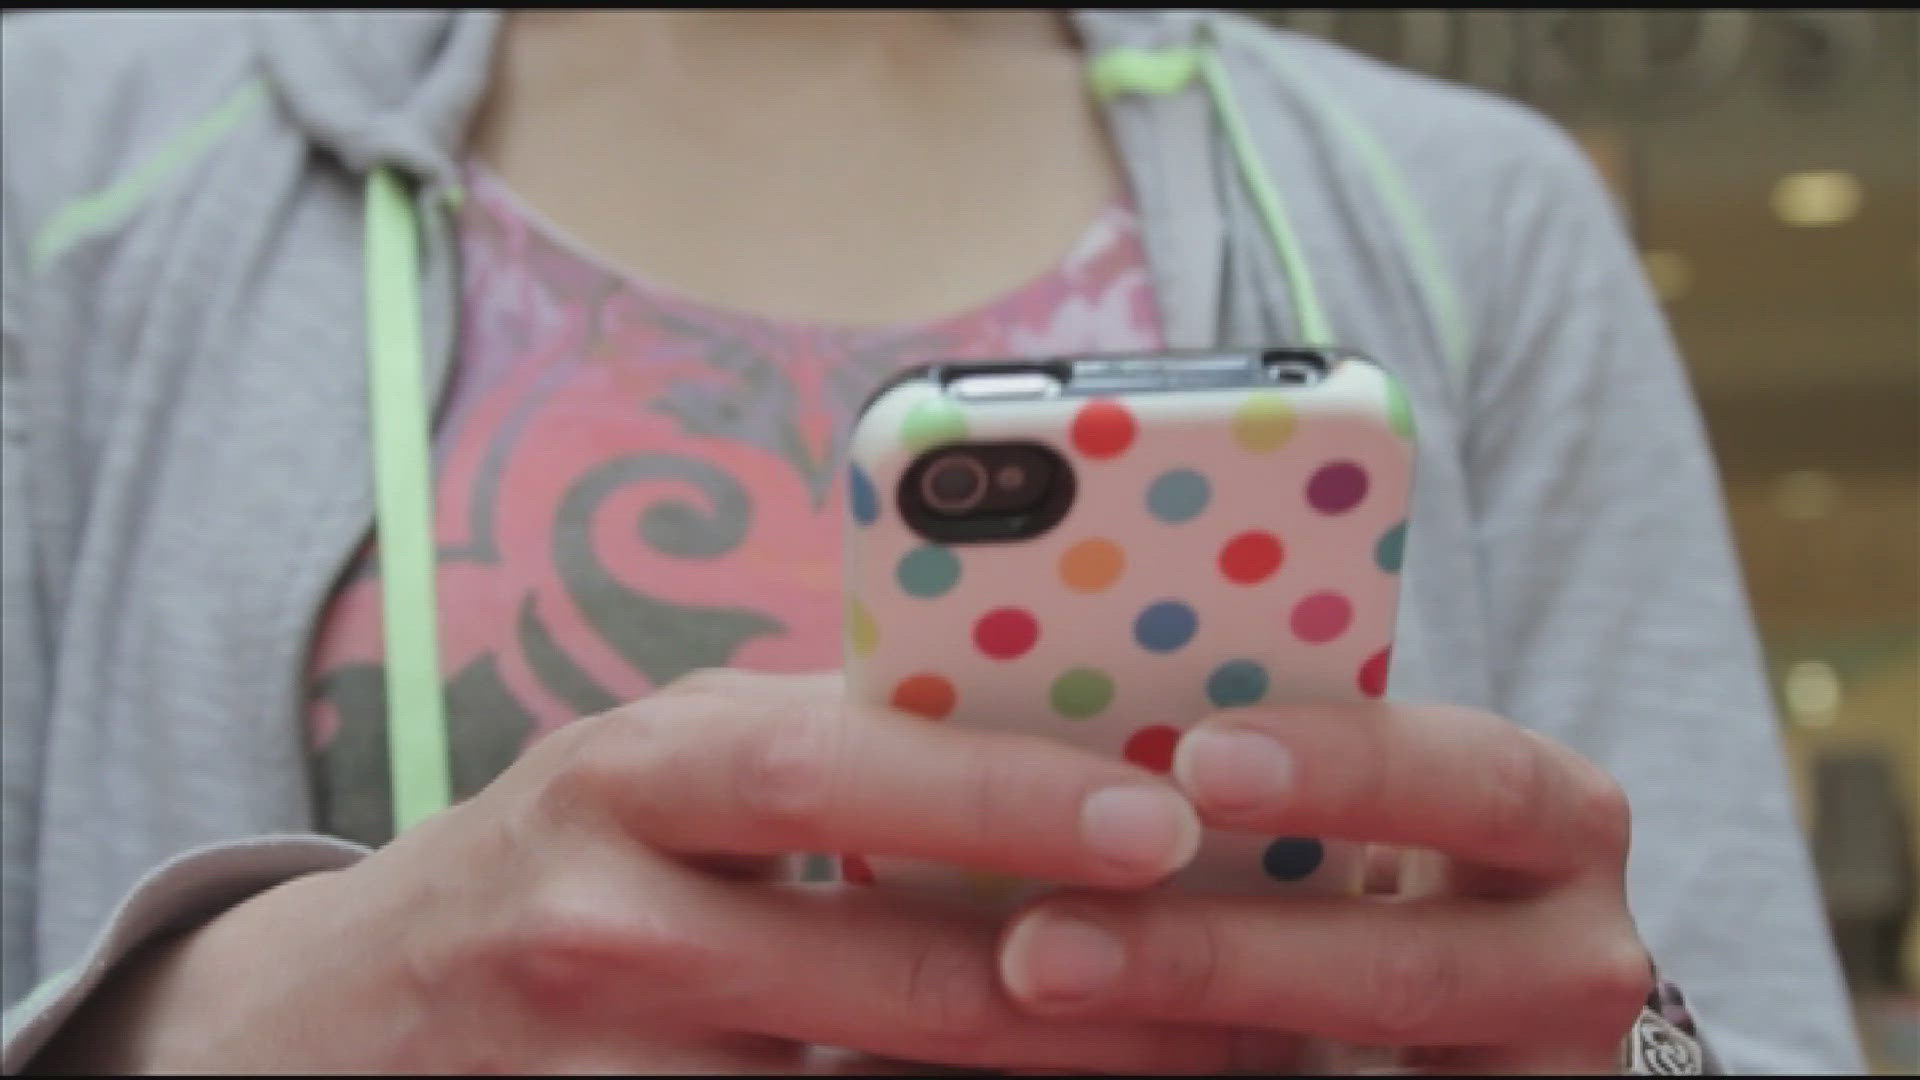 Idaho's largest school district is considering a cell phone ban in all of its schools. The school board trustees will review the policy on May 13.